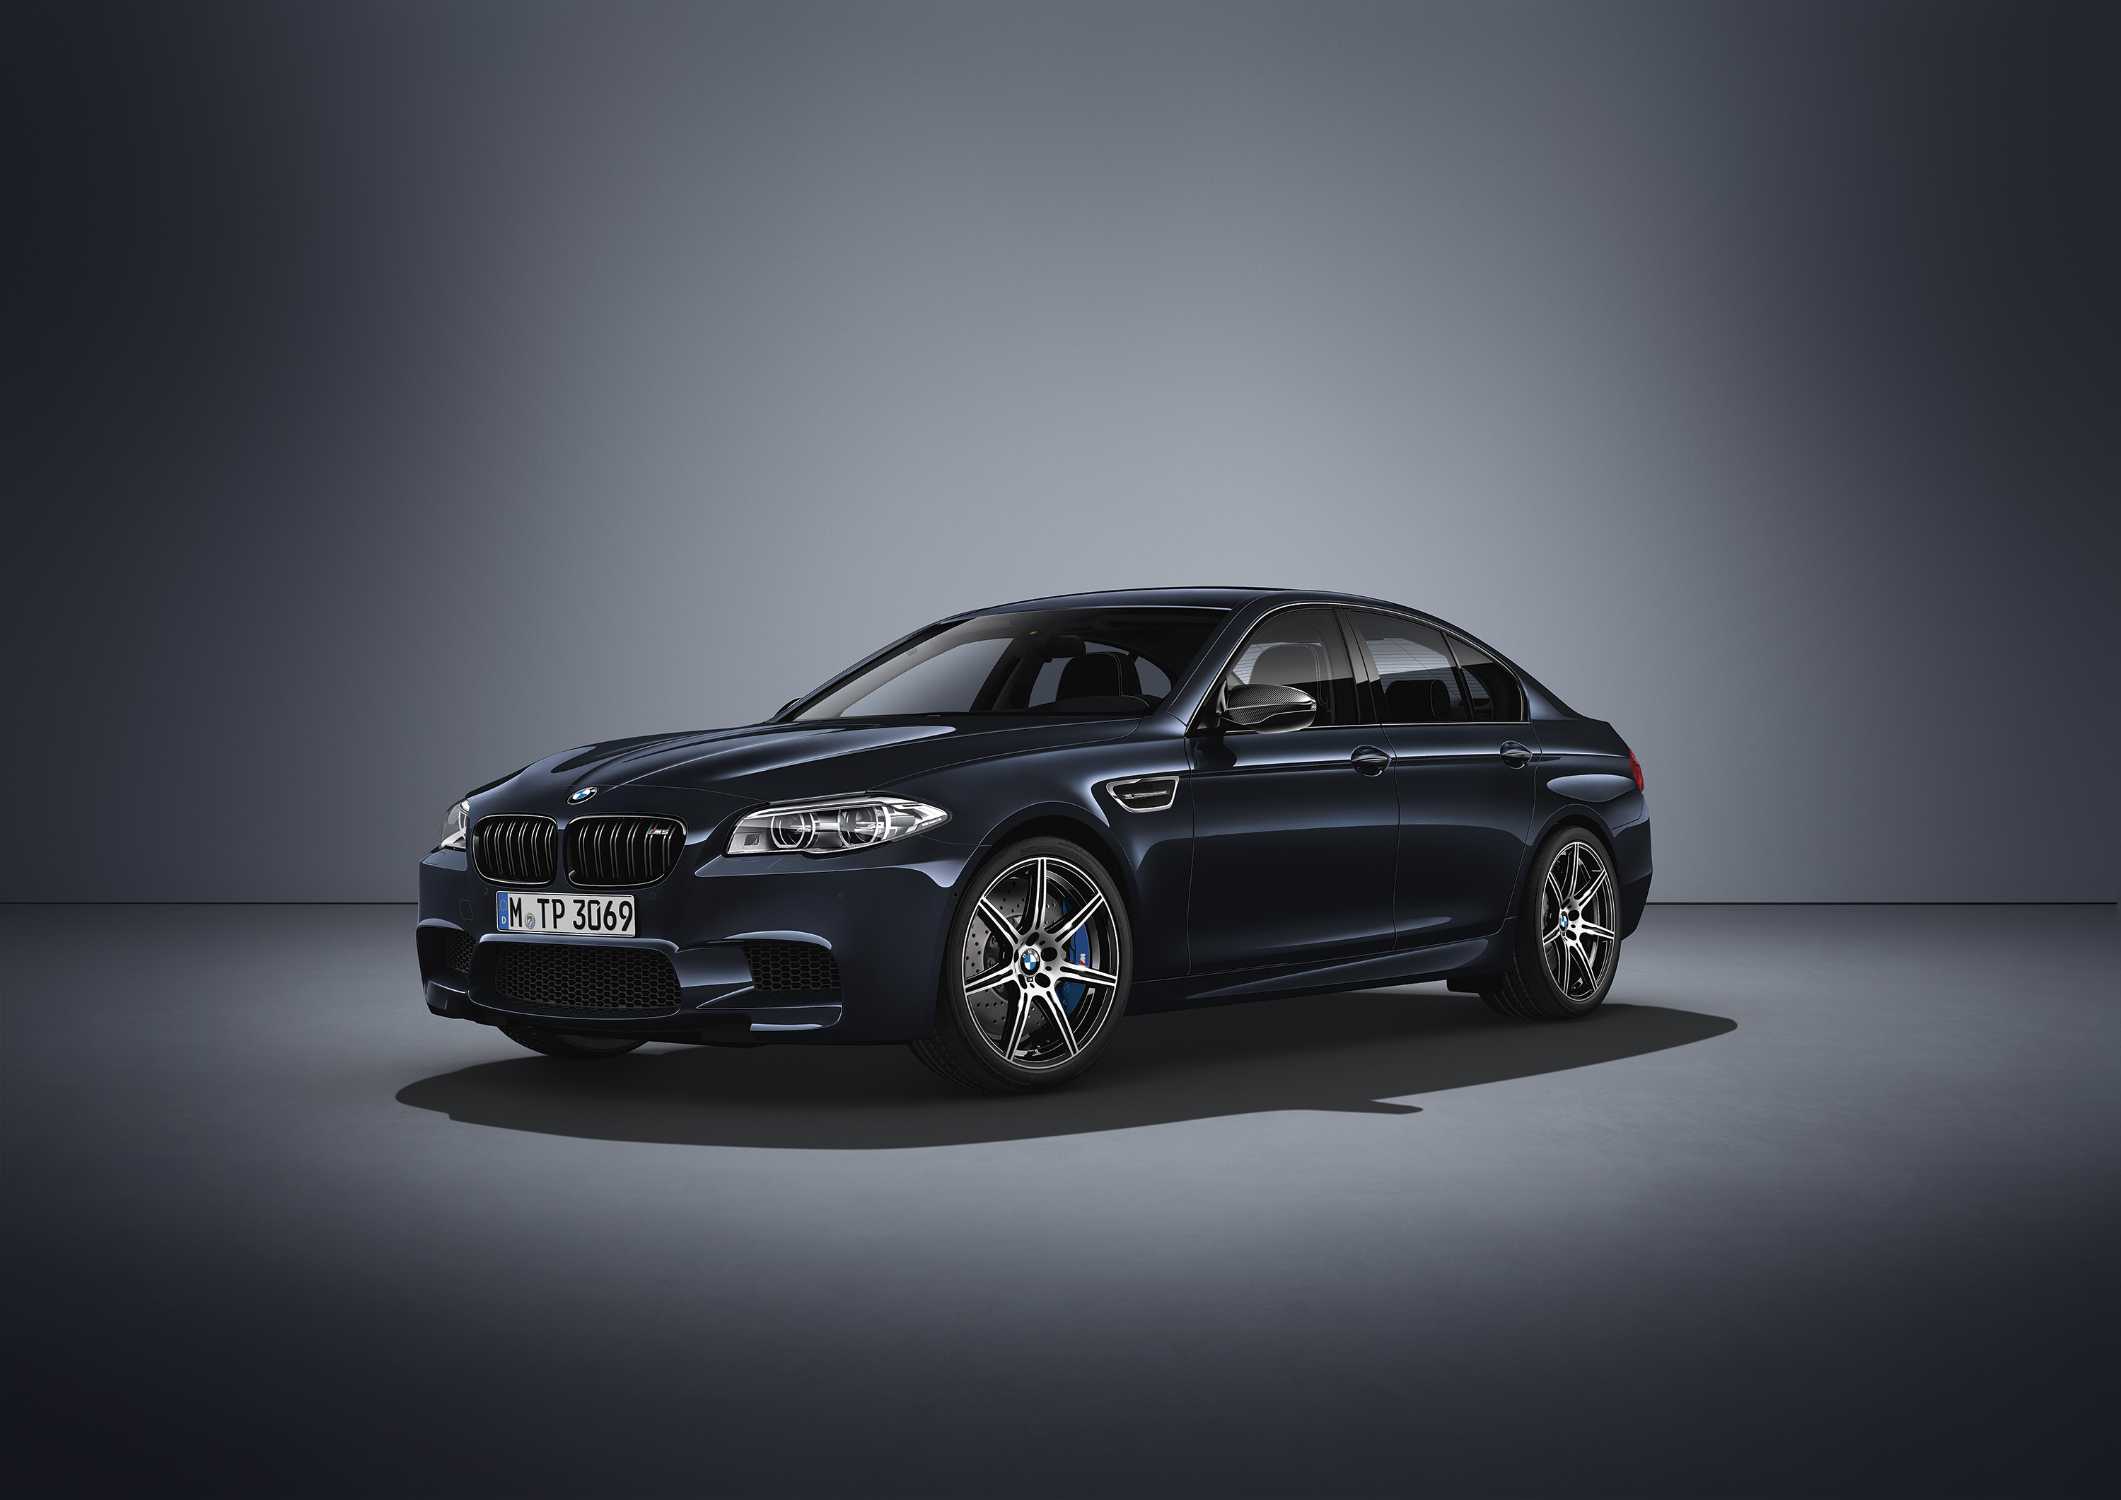 BMW F10 M5 ceases production